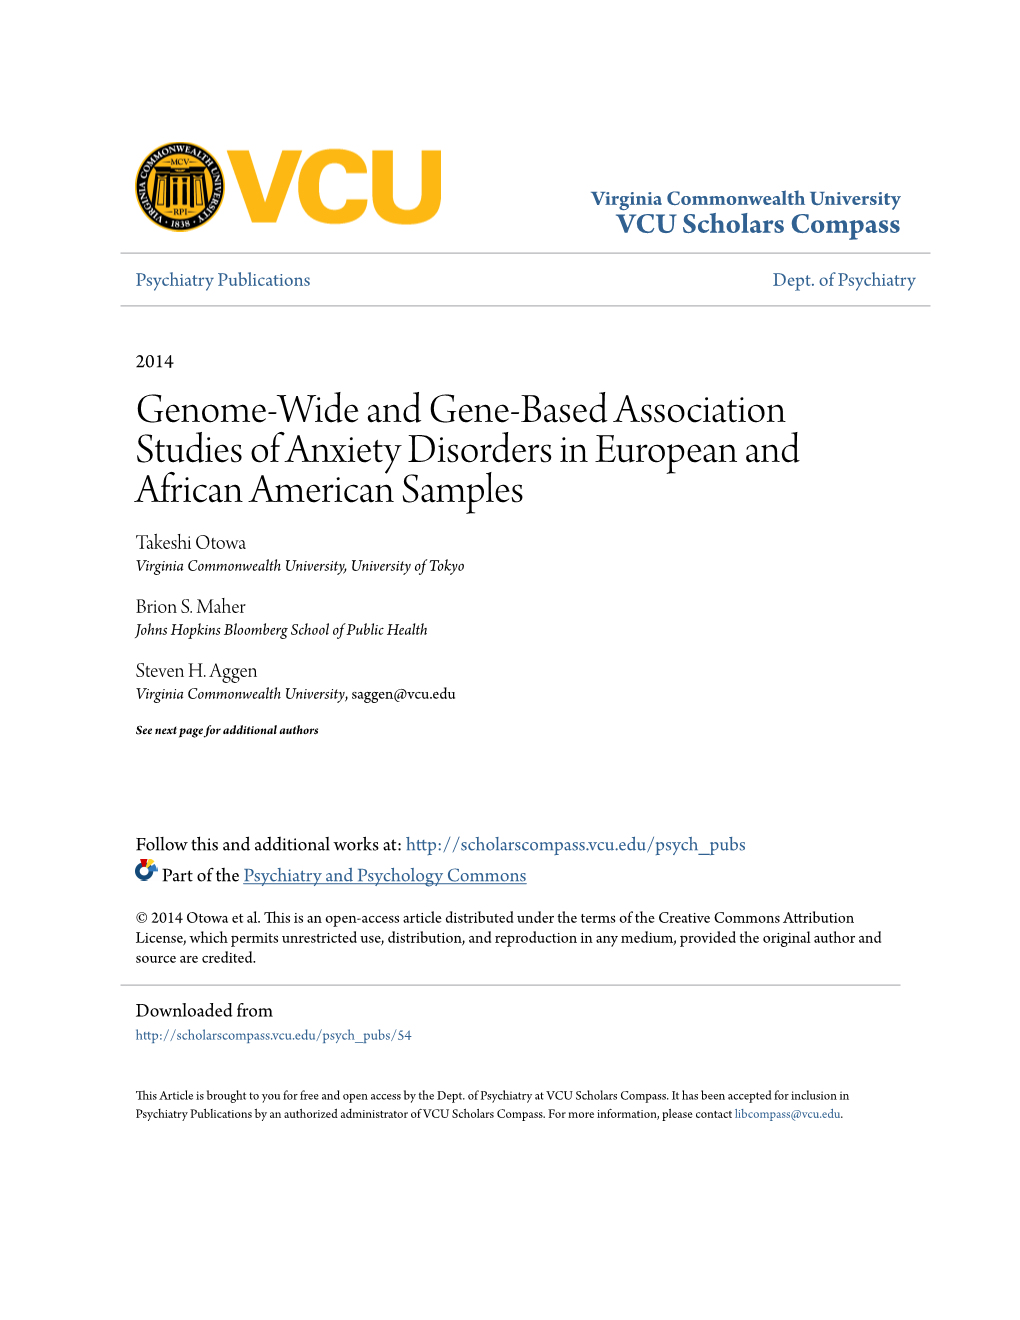 Genome-Wide and Gene-Based Association Studies of Anxiety